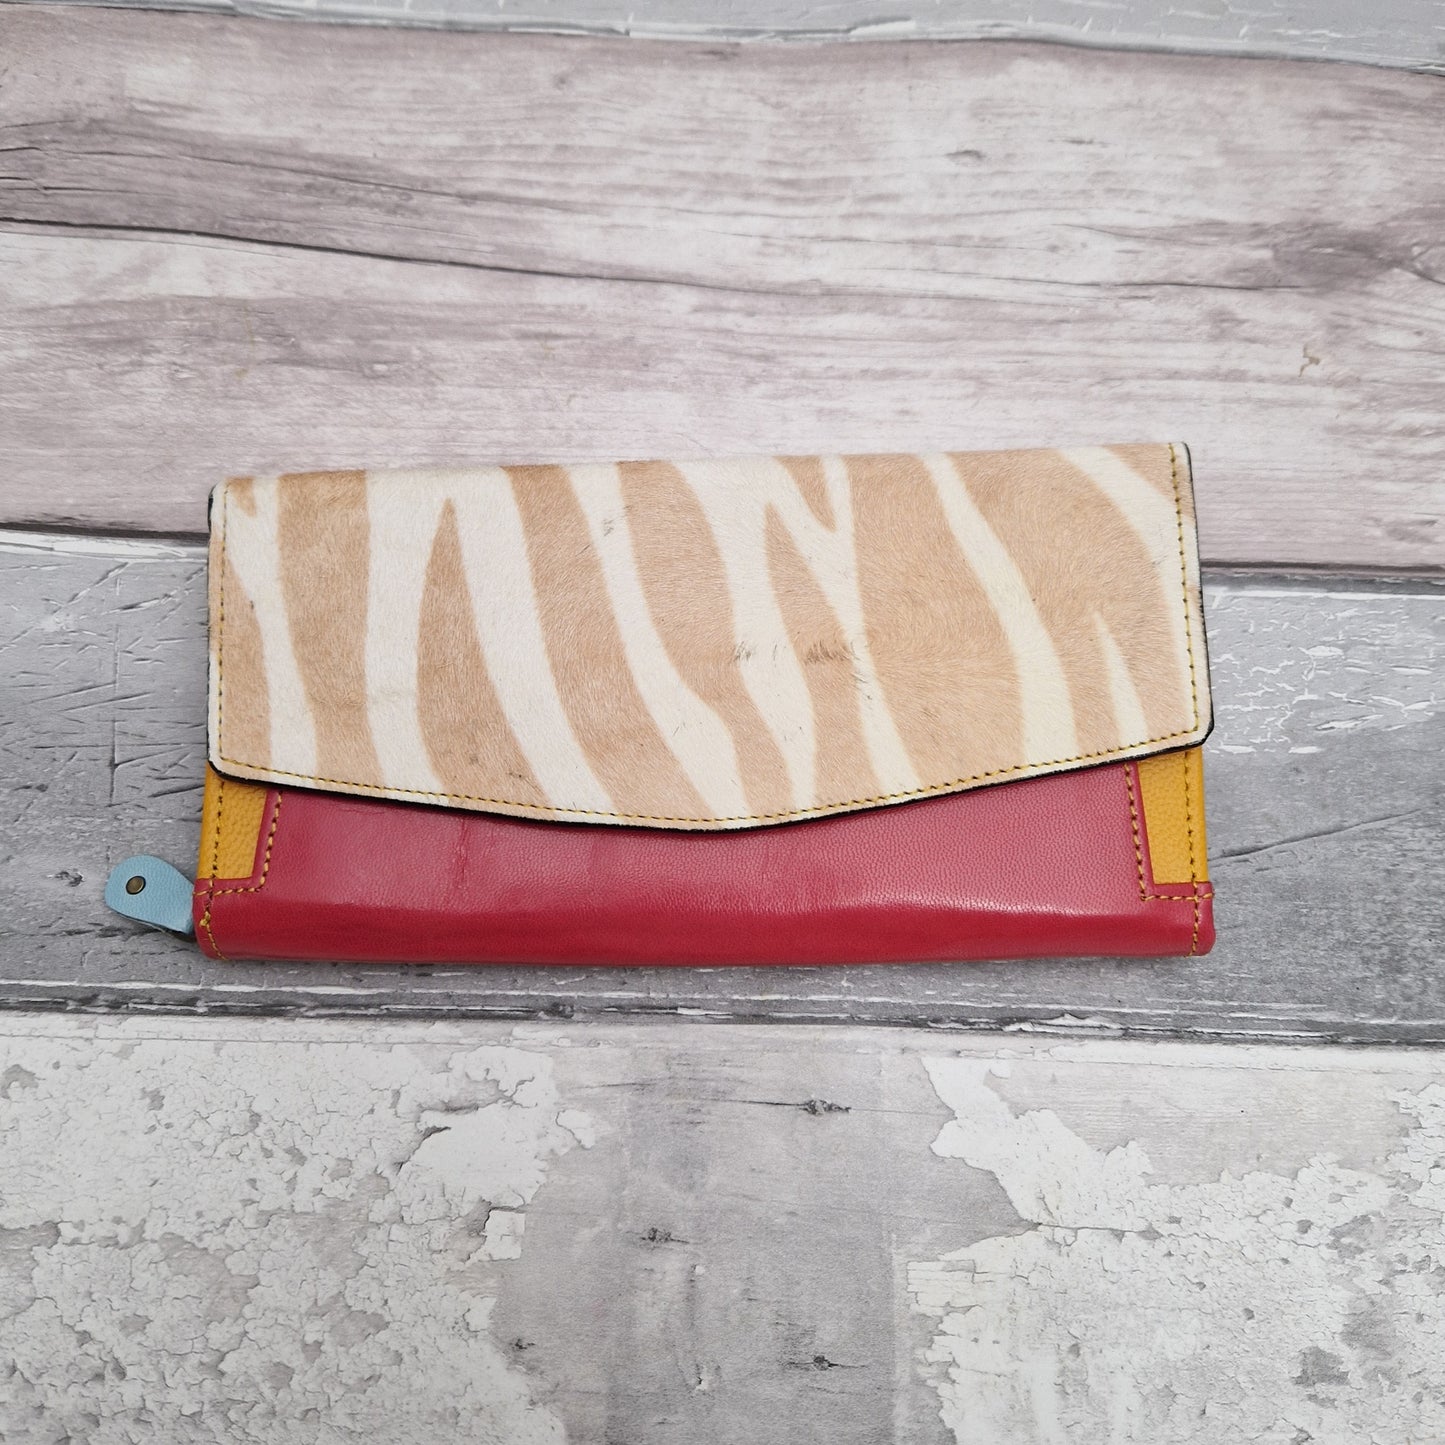 Purse made from leather off cuts featuring textured panels in a zebra print.